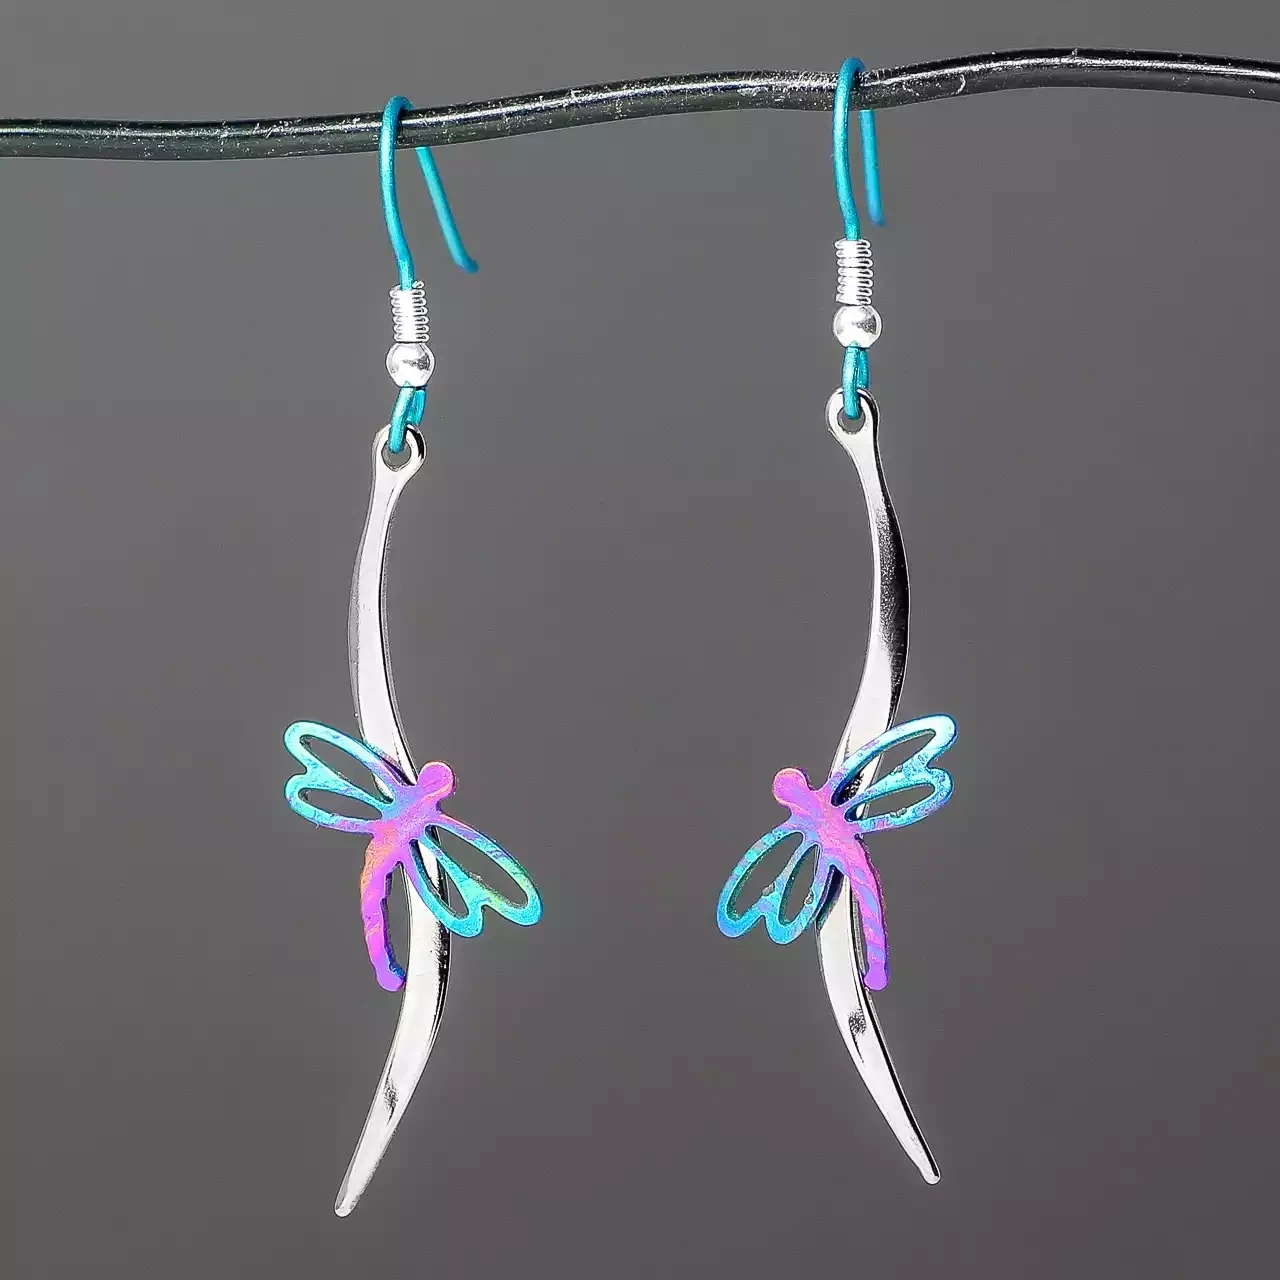 Titanium Dragonfly Drop Earrings - Small With Stem by Prism Design